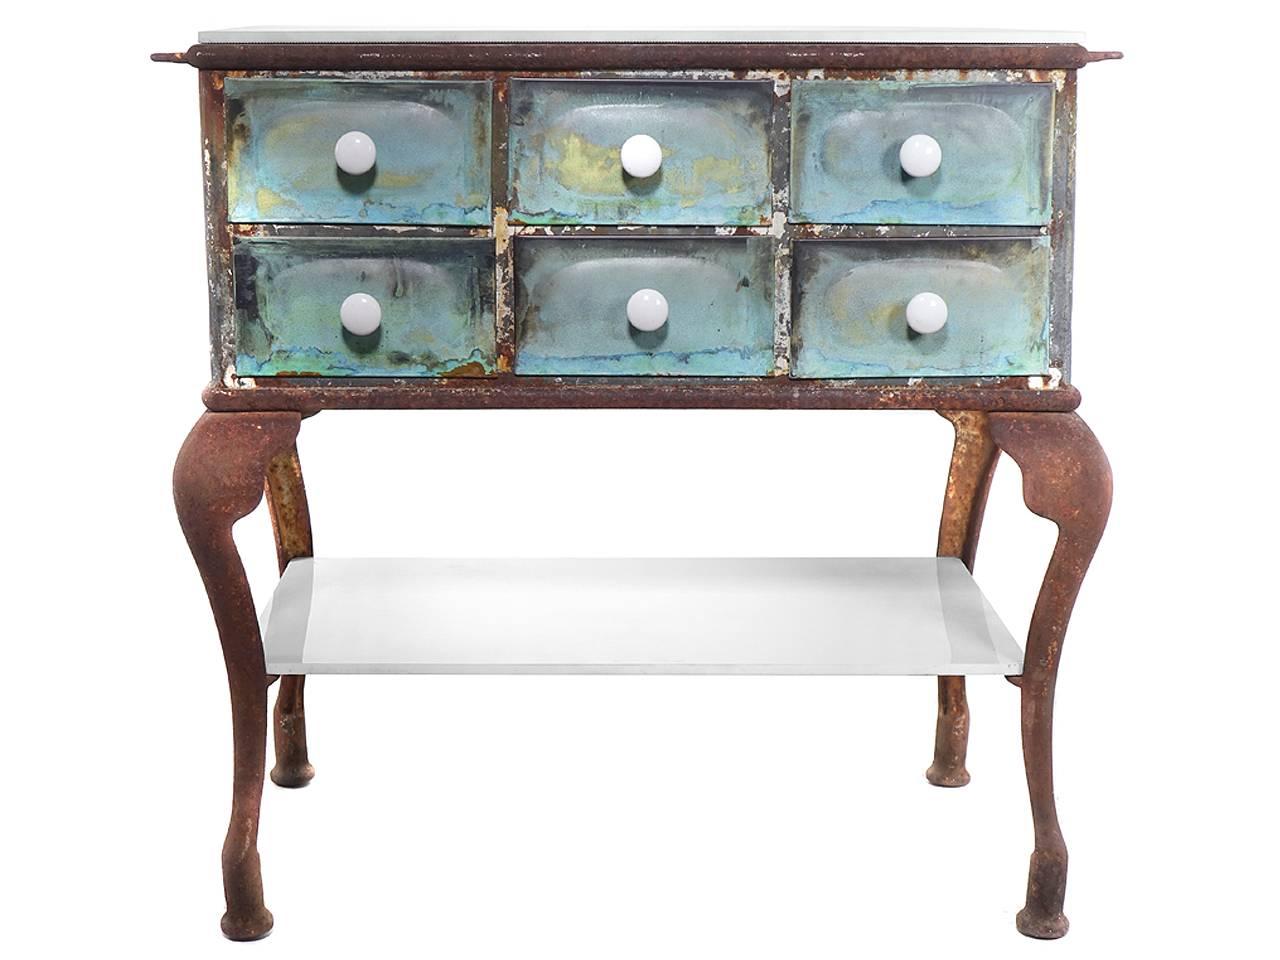 This is a bow leg medical work table with an amazing patina. In this case the patina makes a bigger statement the design of the table itself. The top and glass shelf are heavy milk glass as are the draw pulls.